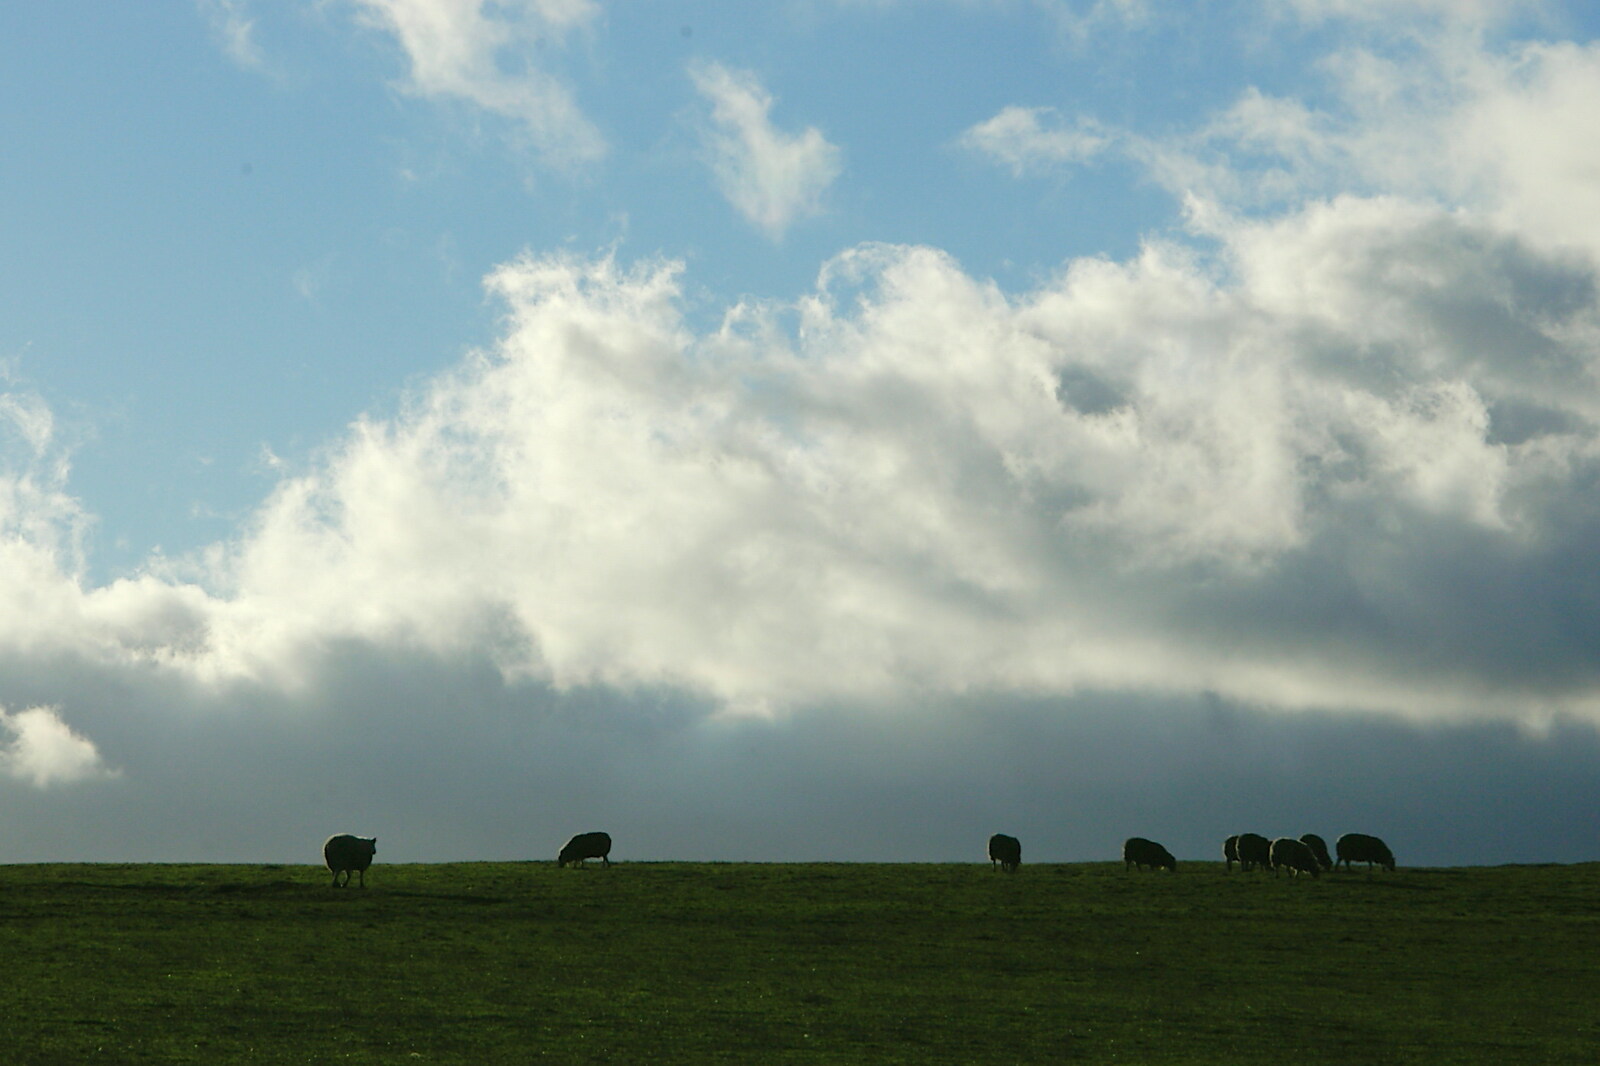 Driving Around Oop North, Hoylandswain, West Yorkshire - 30th January 2005: Sheep on a field